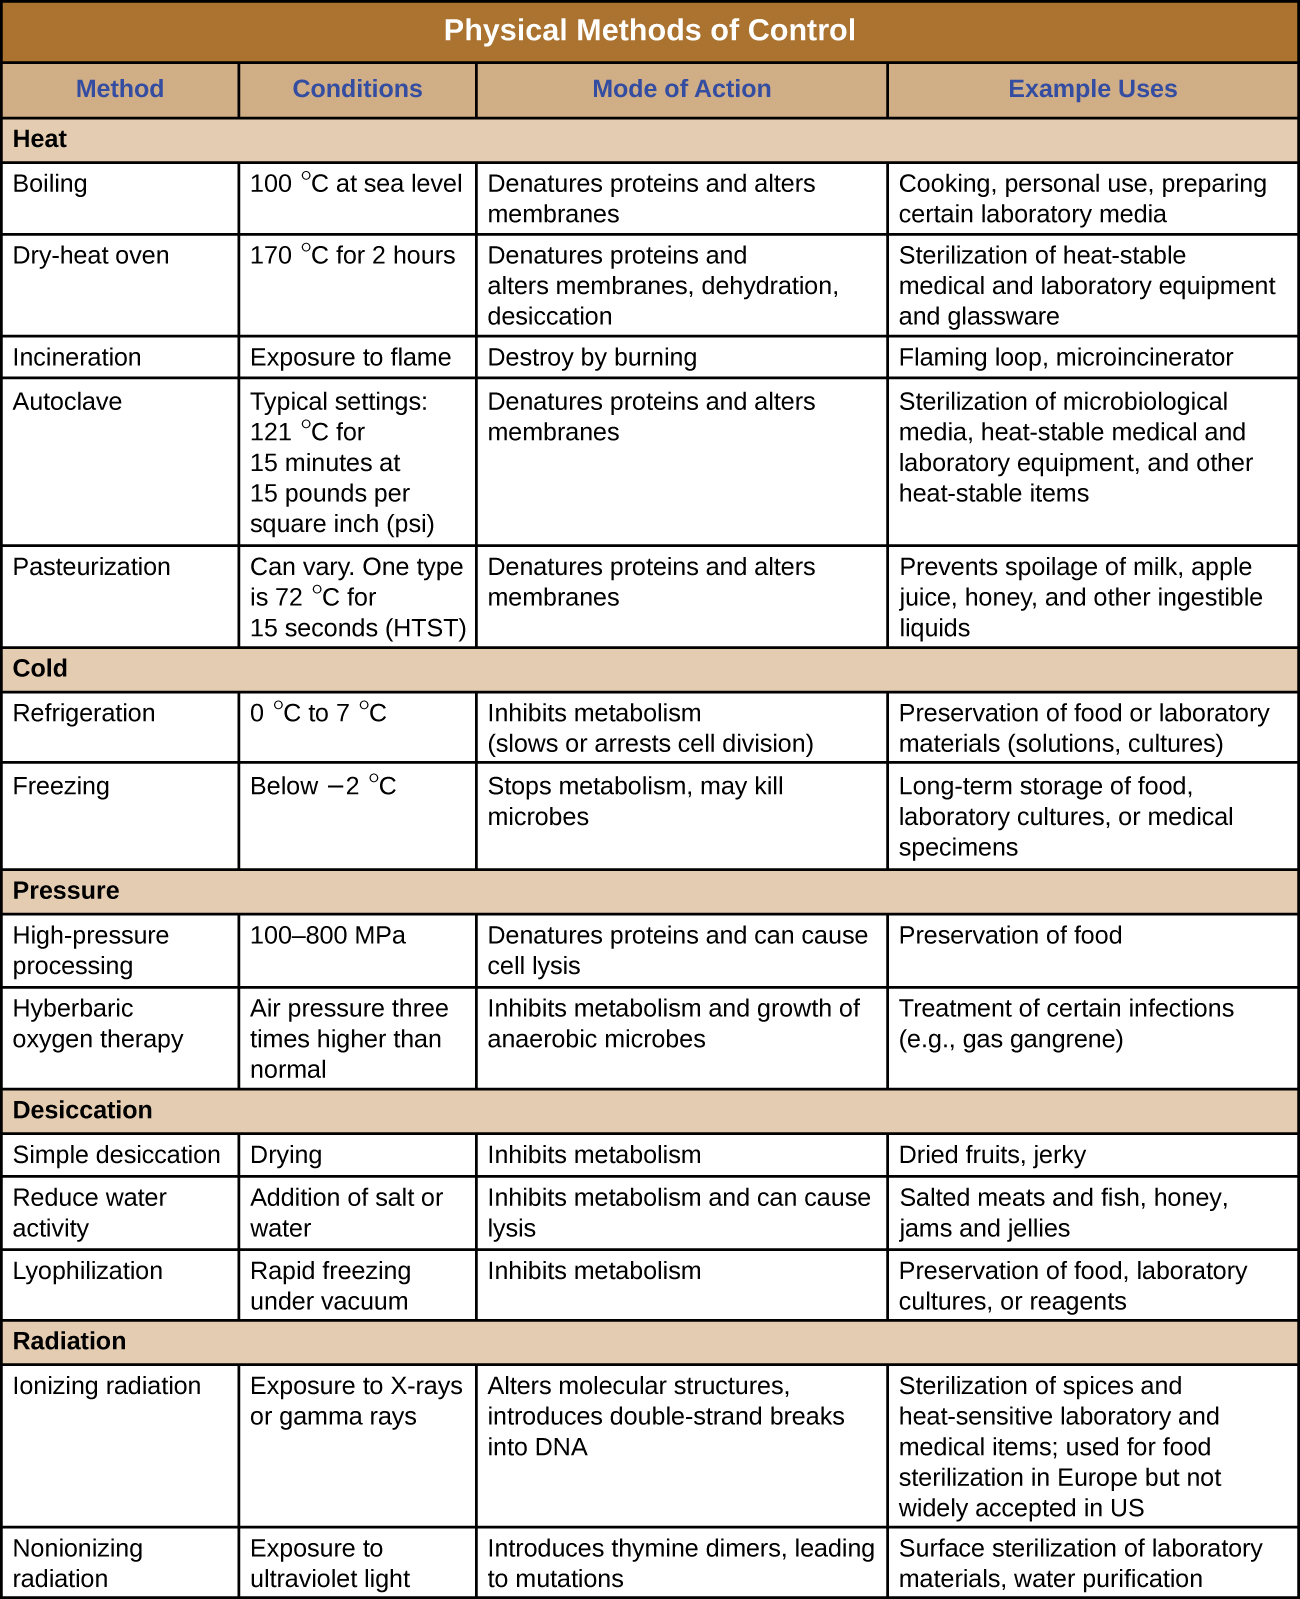 A table titled physical methods of control; 4 columns – method, conditions, mode of action, and examples of use. Groupings are: heat, cold, pressure, desiccation, radiation, sonication, and filtration. Heat. Boiling, 100 °C at sea level, Denatures proteins and alters membranes; usese Cooking, personal use, preparing certain laboratory media. Dry-heat oven, 170 °C for 2 hours, Denatures proteins and alters membranes, dehydration, desiccation; uses Sterilization of heat-stable medical and laboratory equipment and glassware. Incineration, Exposure to flame,Destroy by burning, Flaming loop, microincinerator. Autoclave, Typical settings: 121 °C for 15–40 minutes at 15 psi, Denatures proteins and alters membranes, Sterilization of microbiological media, heat-stable medical and laboratory equipment, and other heat-stable items. Pasteurization, 72 °C for 15 seconds (HTST) or 138 °C for ≥ 2 seconds (UHT), Denatures proteins and alters membranes, Prevents spoilage of milk, apple juice, honey, and other ingestible liquids. Cold. Refrigeration, 0 °C to 7 °C, Inhibits metabolism (slows or arrests cell division), Preservation of food or laboratory materials (solutions, cultures). Freezing, Below −2 °C, Stops metabolism, may kill microbes, Long-term storage of food, laboratory cultures, or medical specimens. Pressure. High-pressure processing, Exposure to pressures of 100–800 MPa, Denatures proteins and can cause cell lysis Preservation of food, Hyberbaric oxygen therapy. Inhalation of pure oxygen at a pressure of 1–3 atm, Inhibits metabolism and growth of anaerobic microbes, Treatment of certain infections (e.g., gas gangrene). Dessication. Simple desiccation, Drying, Inhibits metabolism, Dried fruits, jerky. Reduce water activity, Addition of salt or water Inhibits metabolism and can cause lysis, Salted meats and fish, honey, jams and jellies. Lyophilization, Rapid freezing under vacuum, Inhibits metabolism Preservation of food, laboratory cultures, or reagents. Radiation. Ionizing radiation, Exposure to X-rays or gamma rays, Alters molecular structures, introduces double-strand breaks into DNA, Sterilization of spices and heat-sensitive laboratory and medical items; used for food sterilization in Europe but not widely accepted in US. Nonionizing radiation, Exposure to ultraviolet light, Introduces thymine dimers, leading to mutations, Surface sterilization of laboratory materials, water purification. Sonication, Exposure to ultrasonic waves, Cavitation (formation of empty space) disrupts cells, lysing them, Laboratory research to lyse cells; cleaning jewelry, lenses, and equipment. Filtration. HEPA filtration, Use of HEPA filter with 0.3-µm pore size Physically removes microbes from air, Laboratory biological safety cabinets, operating rooms, isolation units, heating and air conditioning systems, vacuum cleaners. Membrane filtration Use of membrane filter with 0.2-µm or smaller pore size, Physically removes microbes from liquid solutions, Removal of bacteria from heat-sensitive solutions like vitamins, antibiotics, and media with heat-sensitive components. 